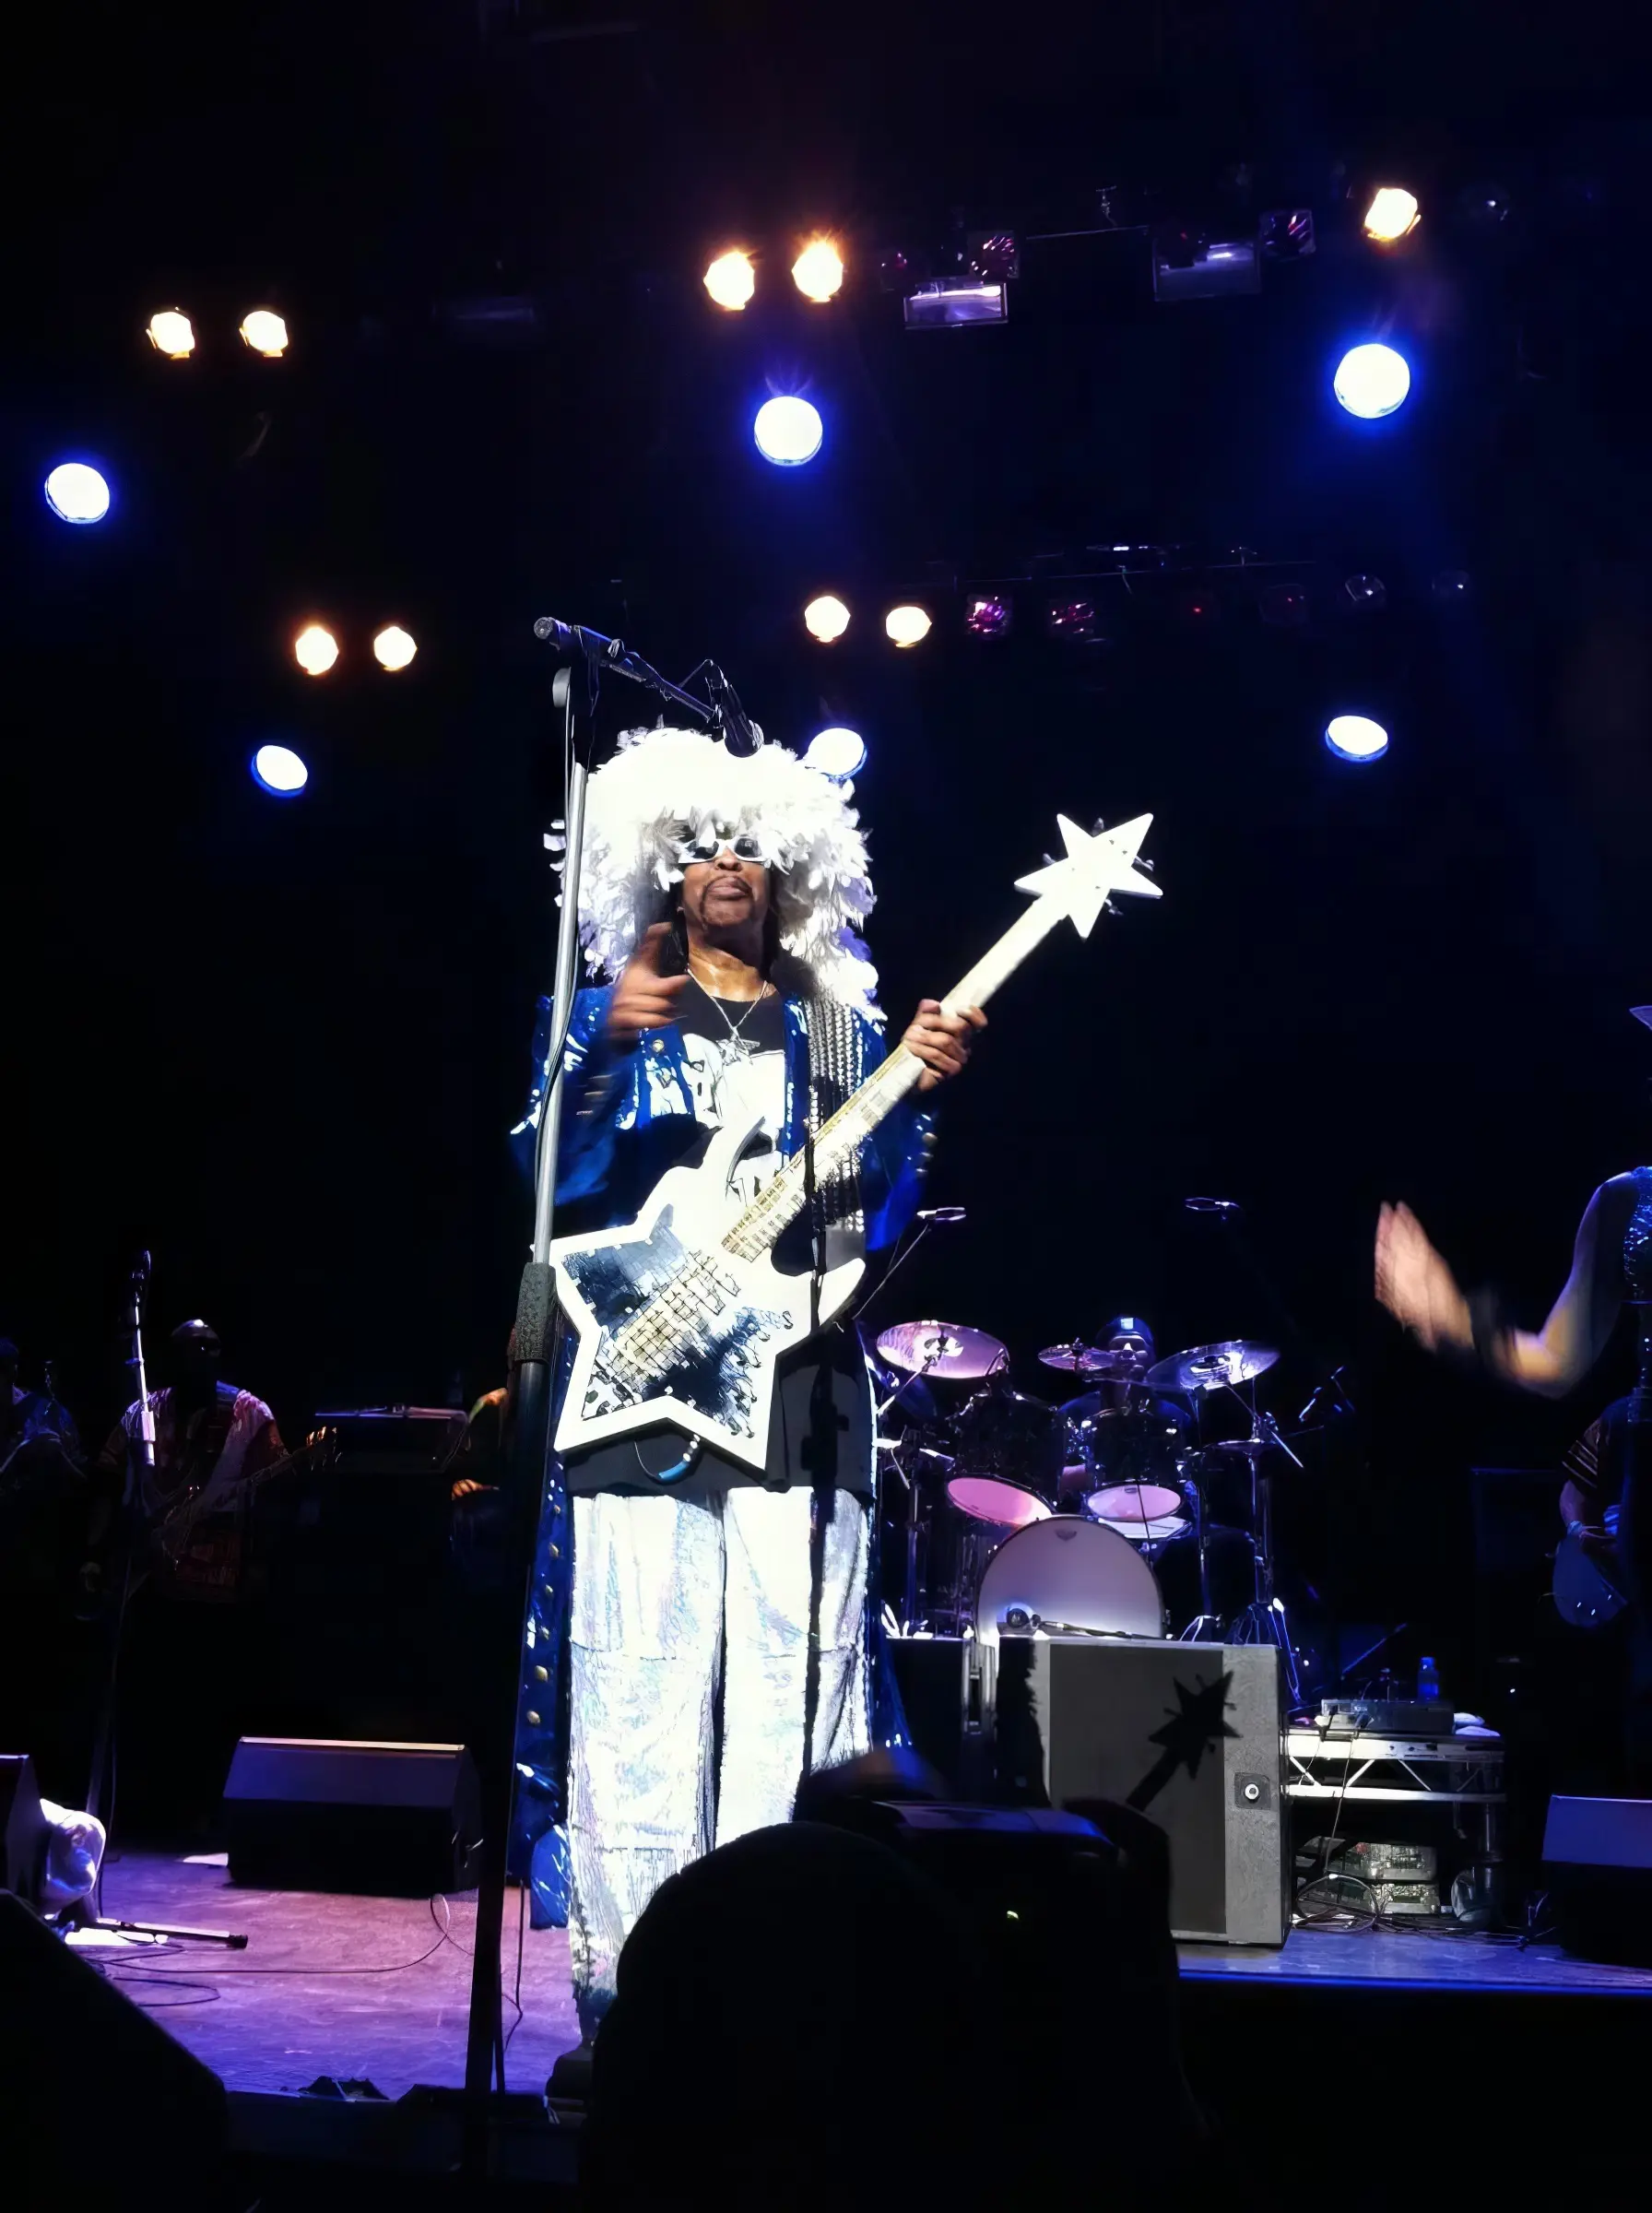 osoby bootsy collins